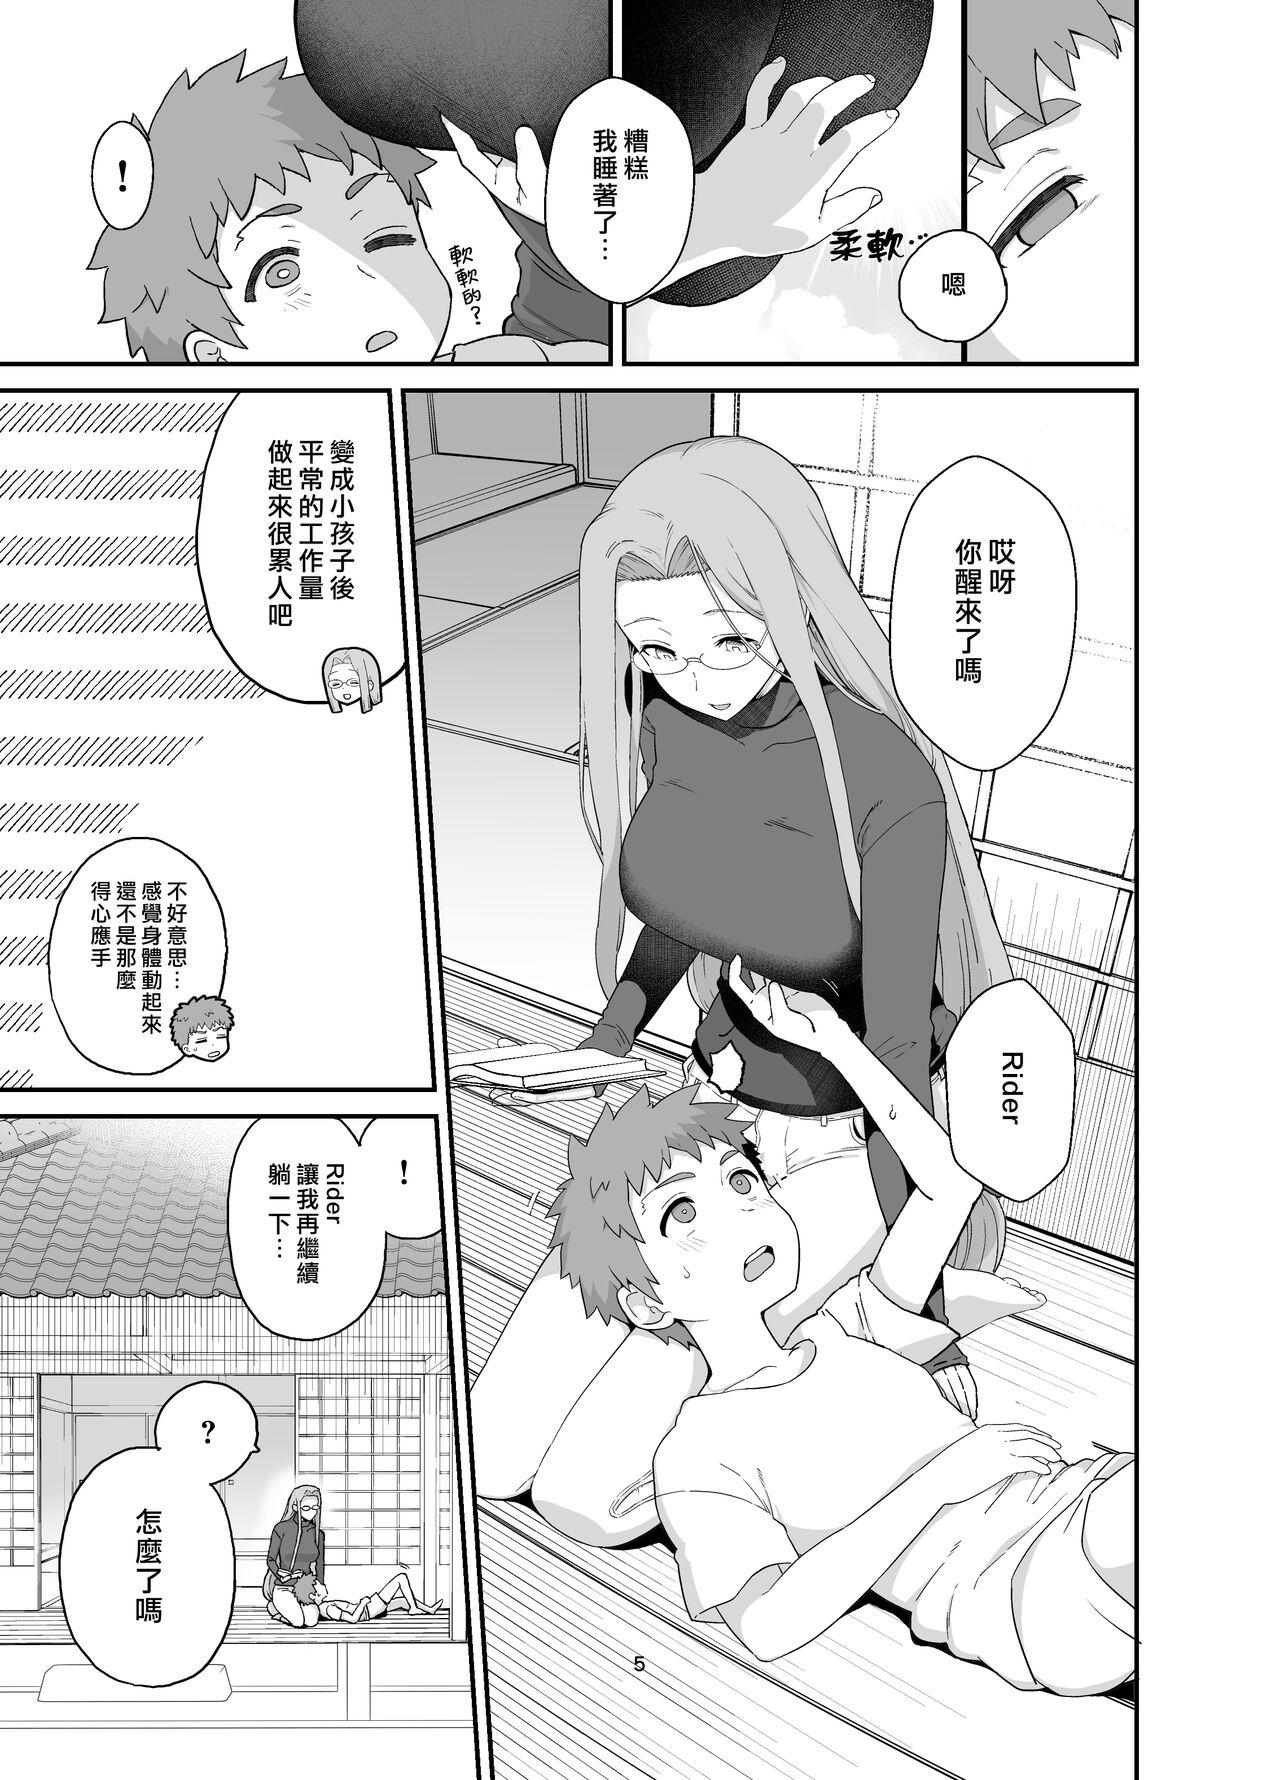 Puto Rider-san to Orusuban - Fate stay night Francaise - Page 8